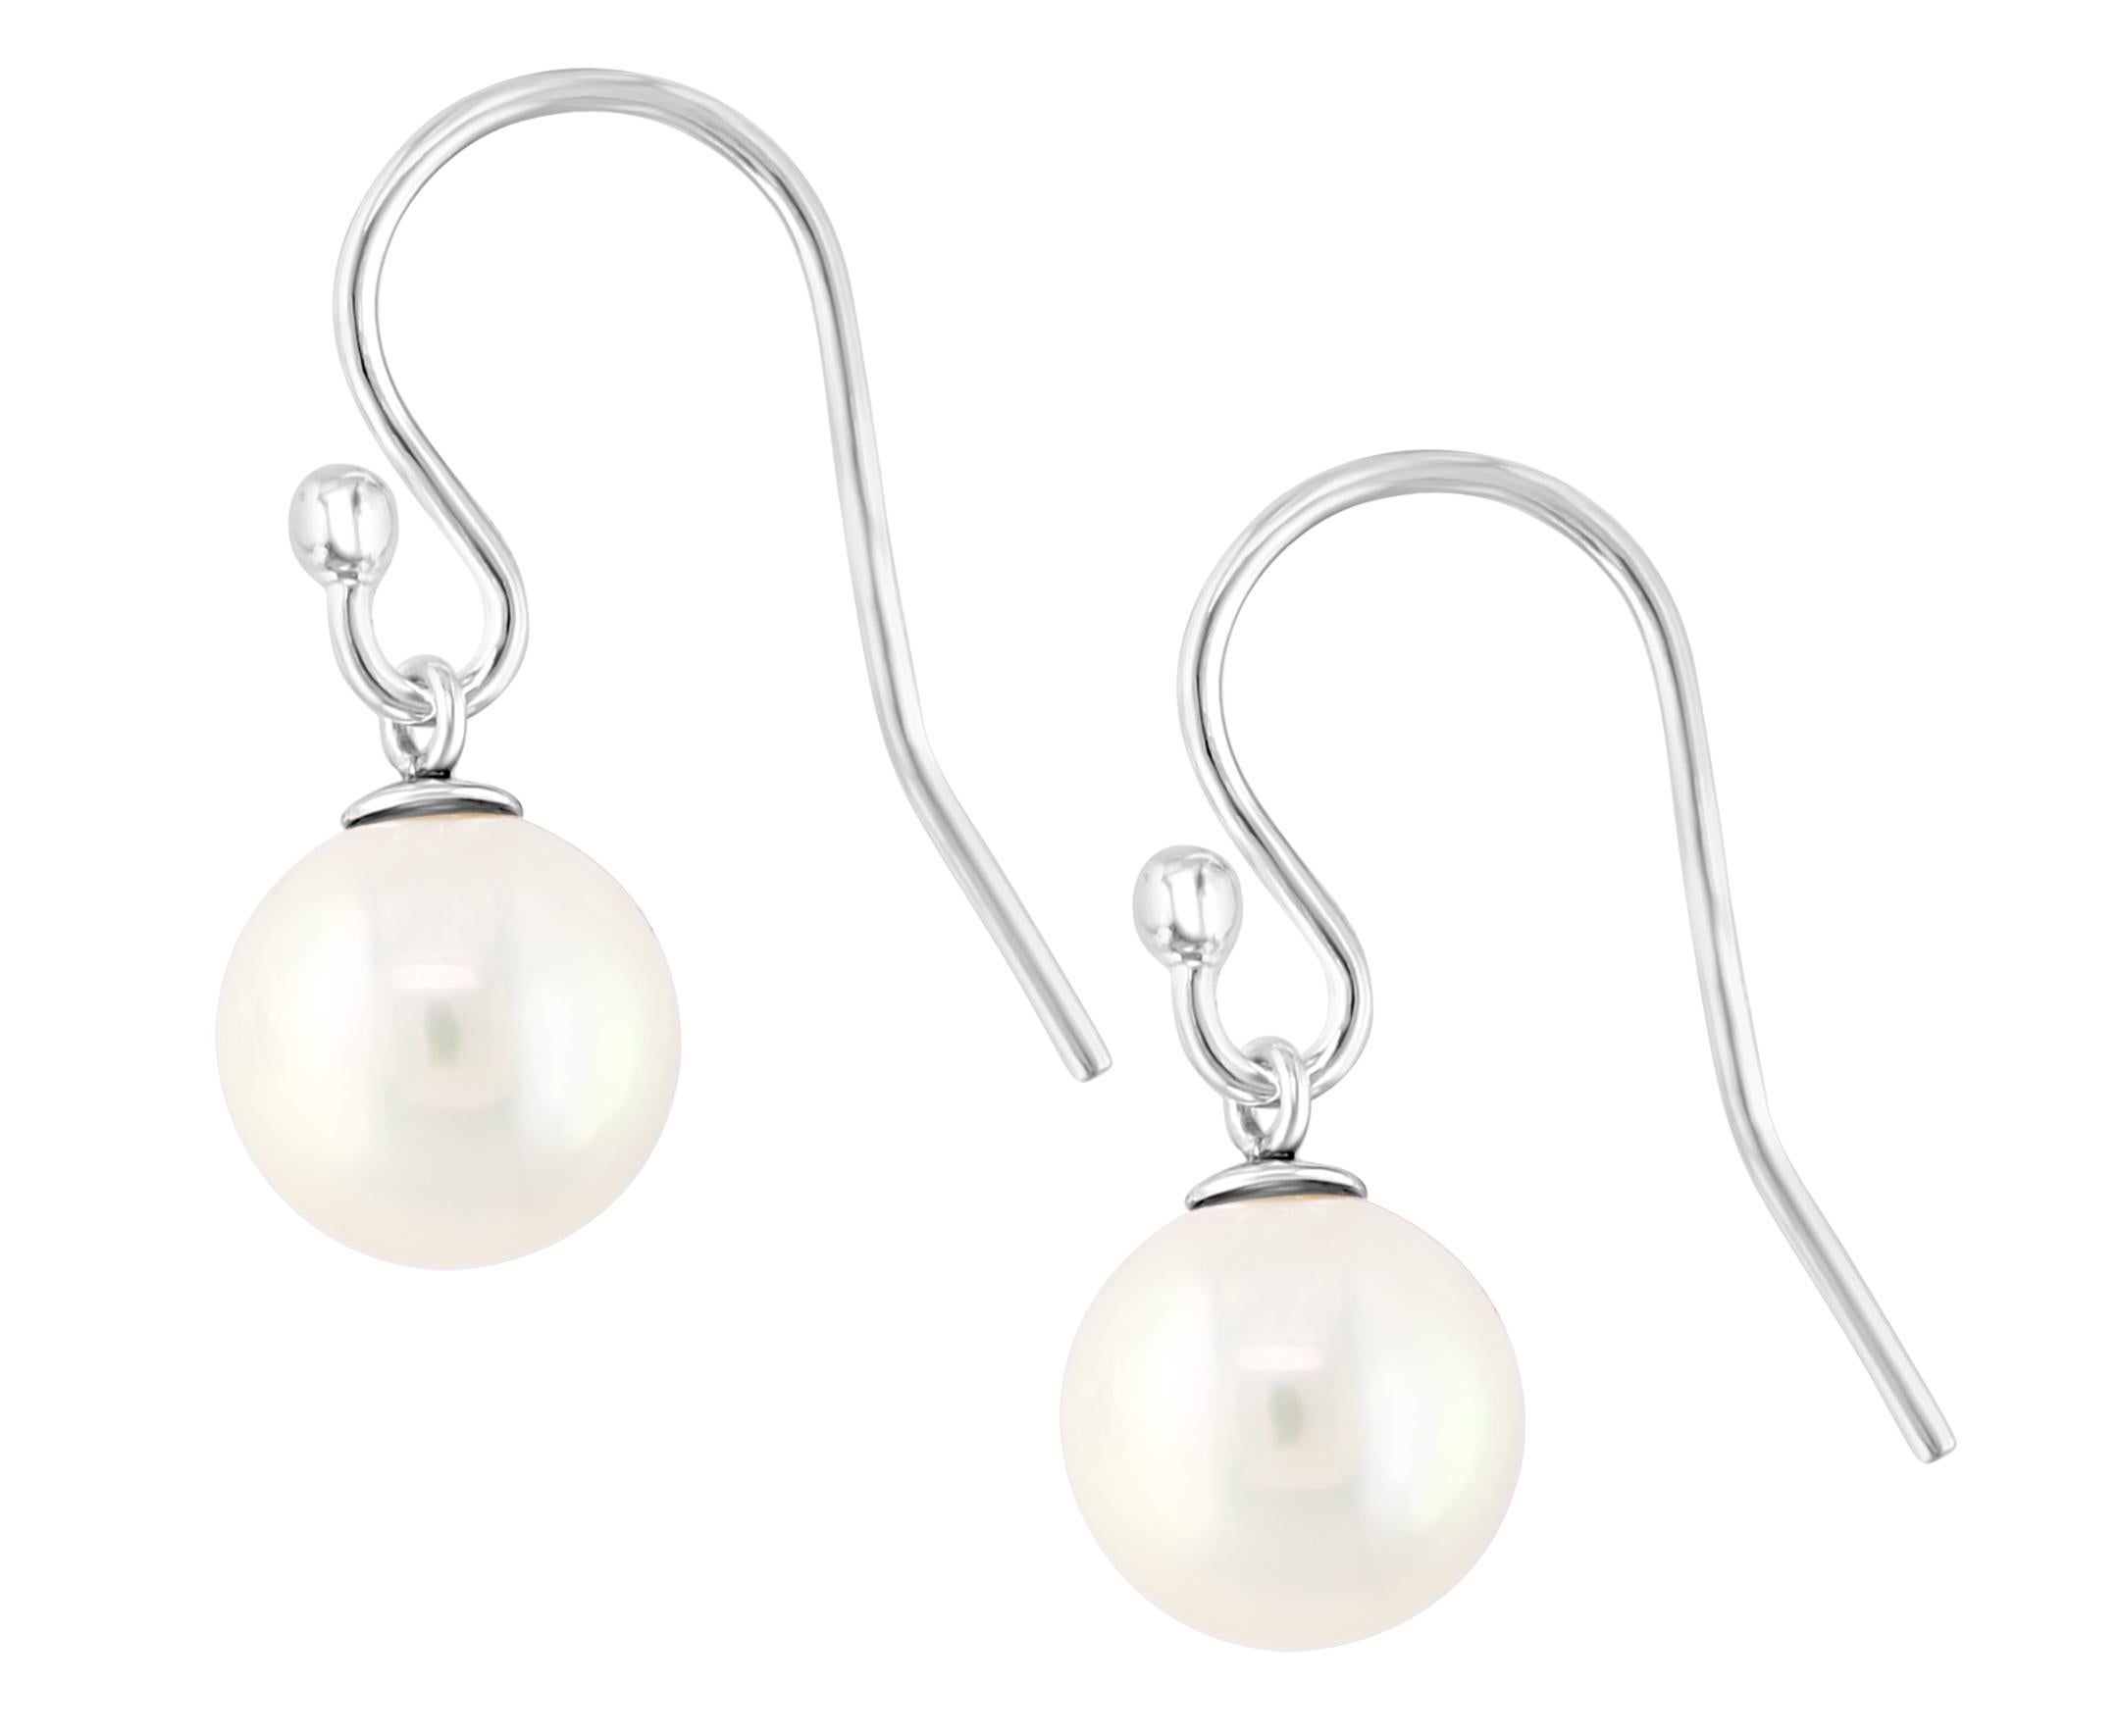 These dangle earrings feature Freshwater Cultured white round pearls measuring 7.5-8mm and are set on a sterling silver ear wire.  Simple yet classy, these earrings are a staple of any wardrobe. 
AN ELEGANT EXPRESSION – This gorgeous cultured